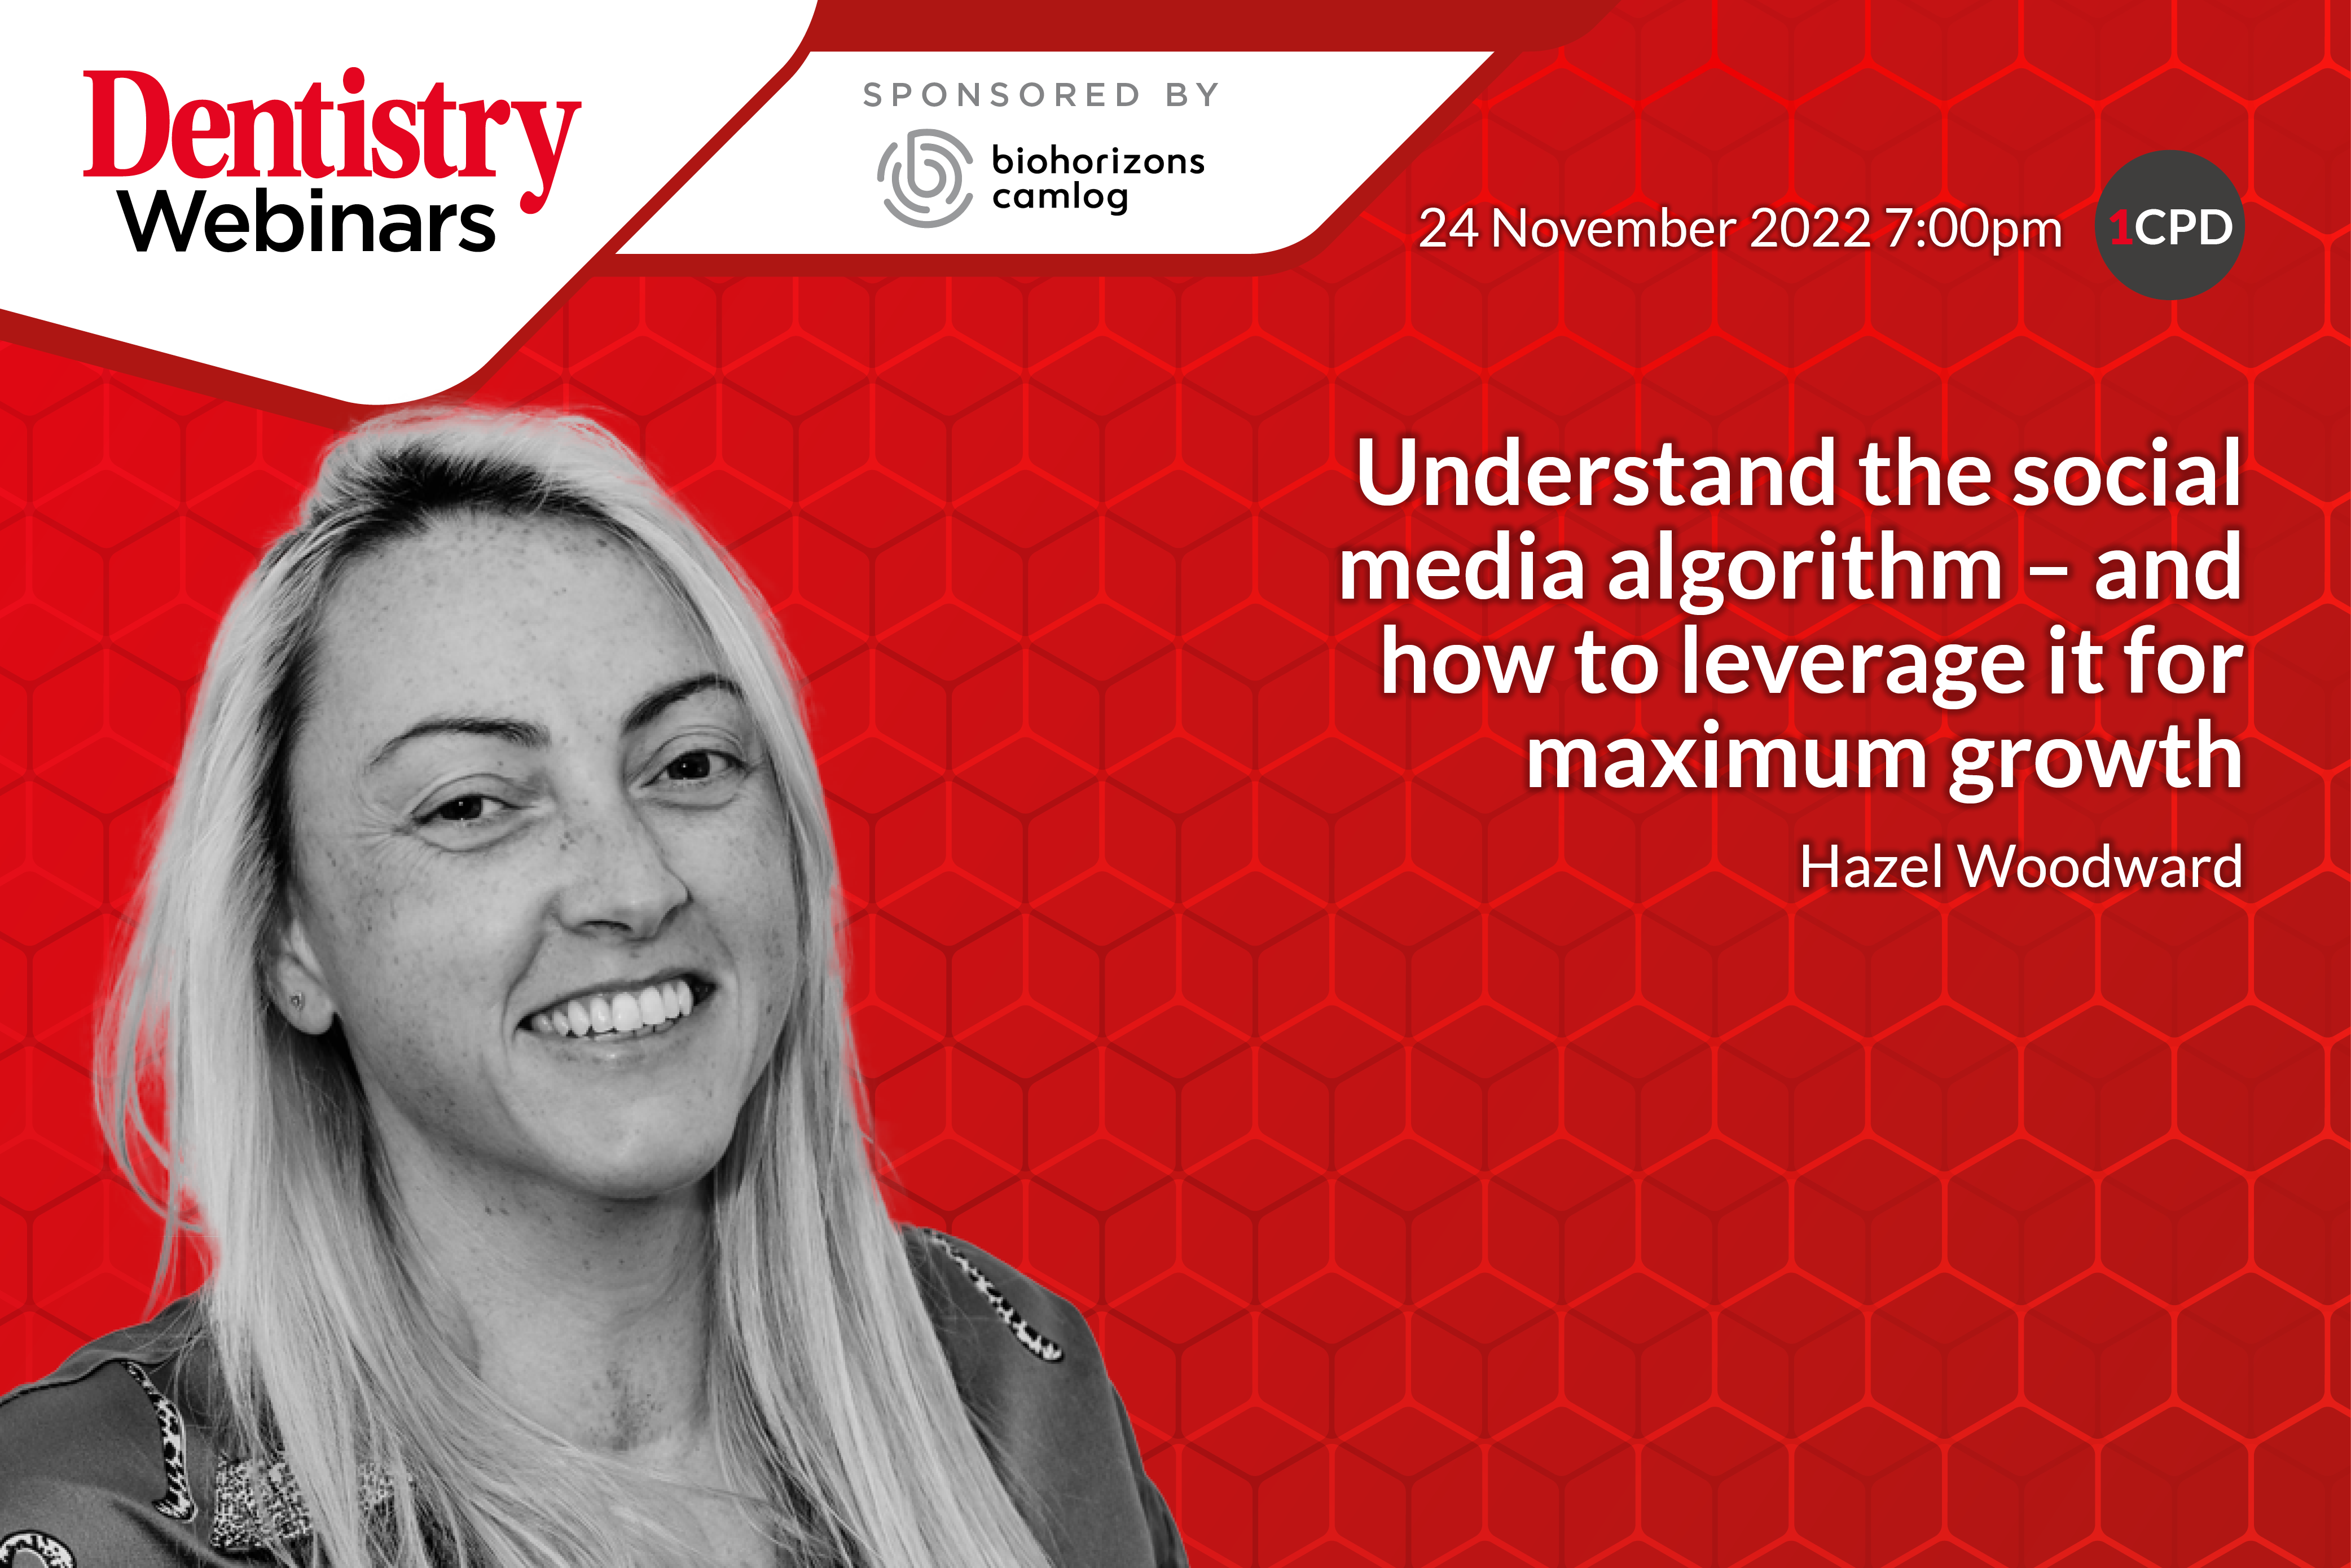 Join Hazel Woodward on Thursday 24 November at 7pm as she discusses the social media algorithm and how to leverage it for maximum growth. 